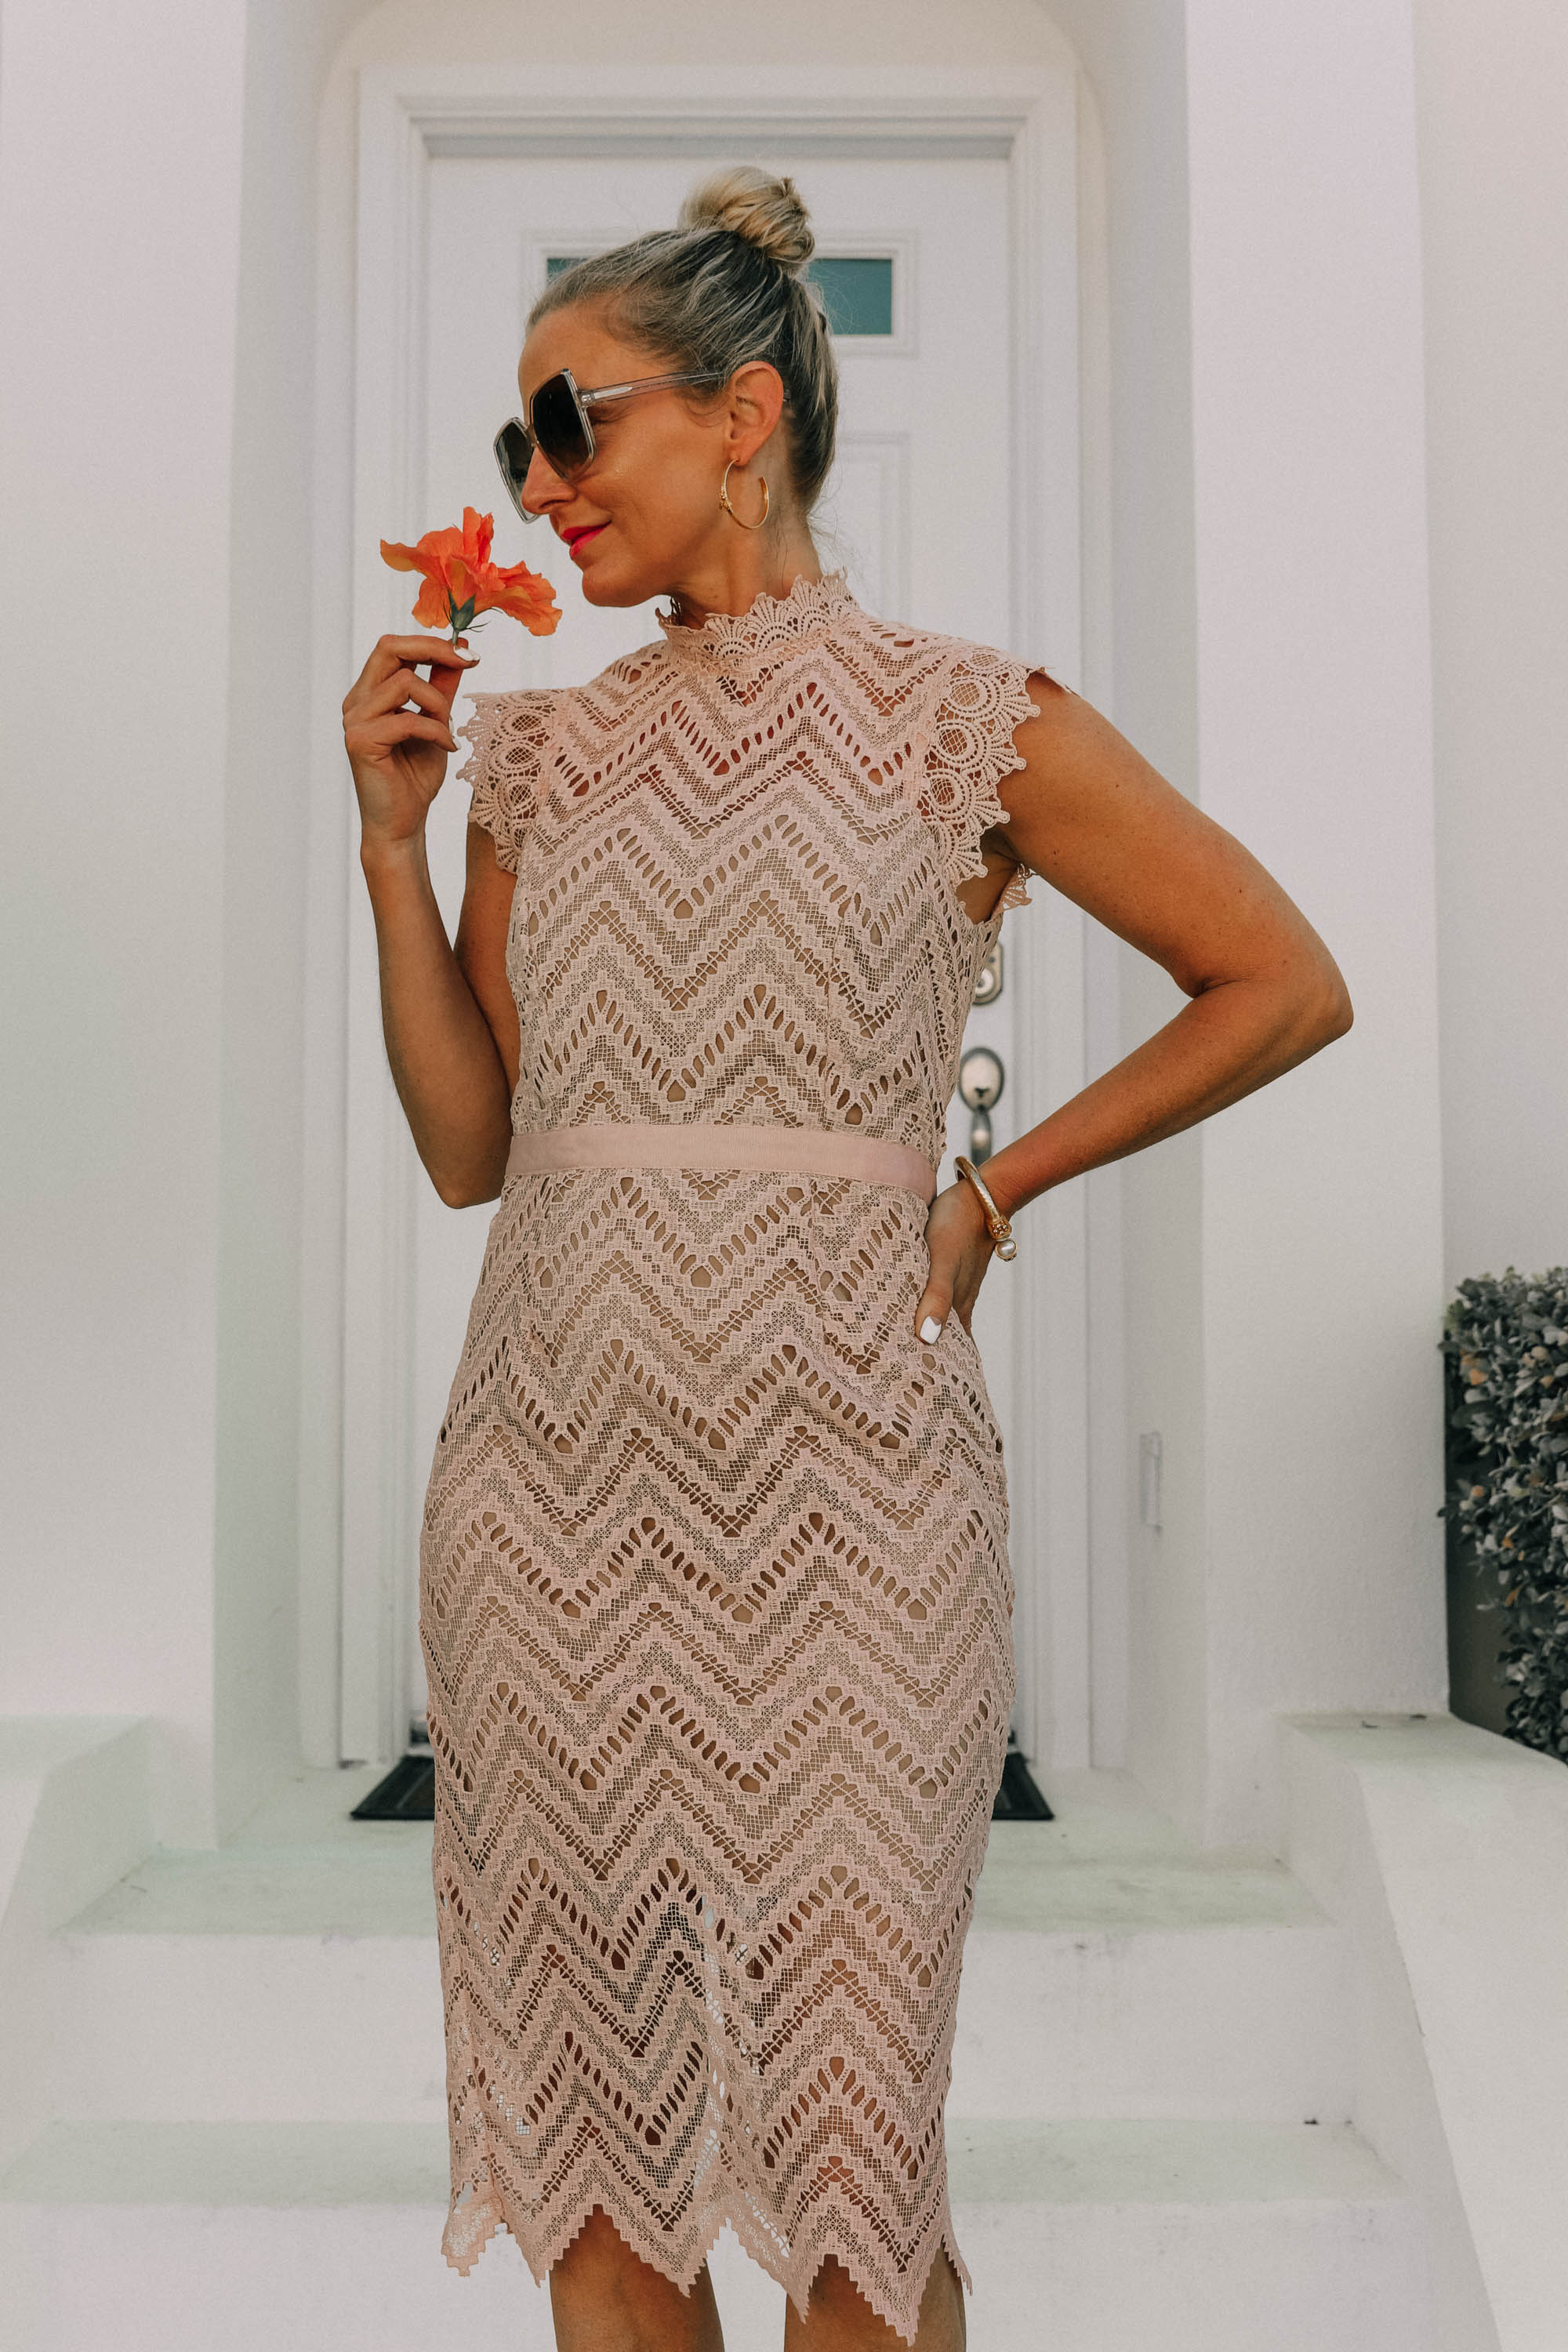 Mother's Day Dresses, Fashion blogger Erin Busbee of BusbeeStyle.com wearing a pink blush lace Bardot dress in the Bahamas styled with nude Valentino rockstud sandals and gold jewelry from Nordstrom